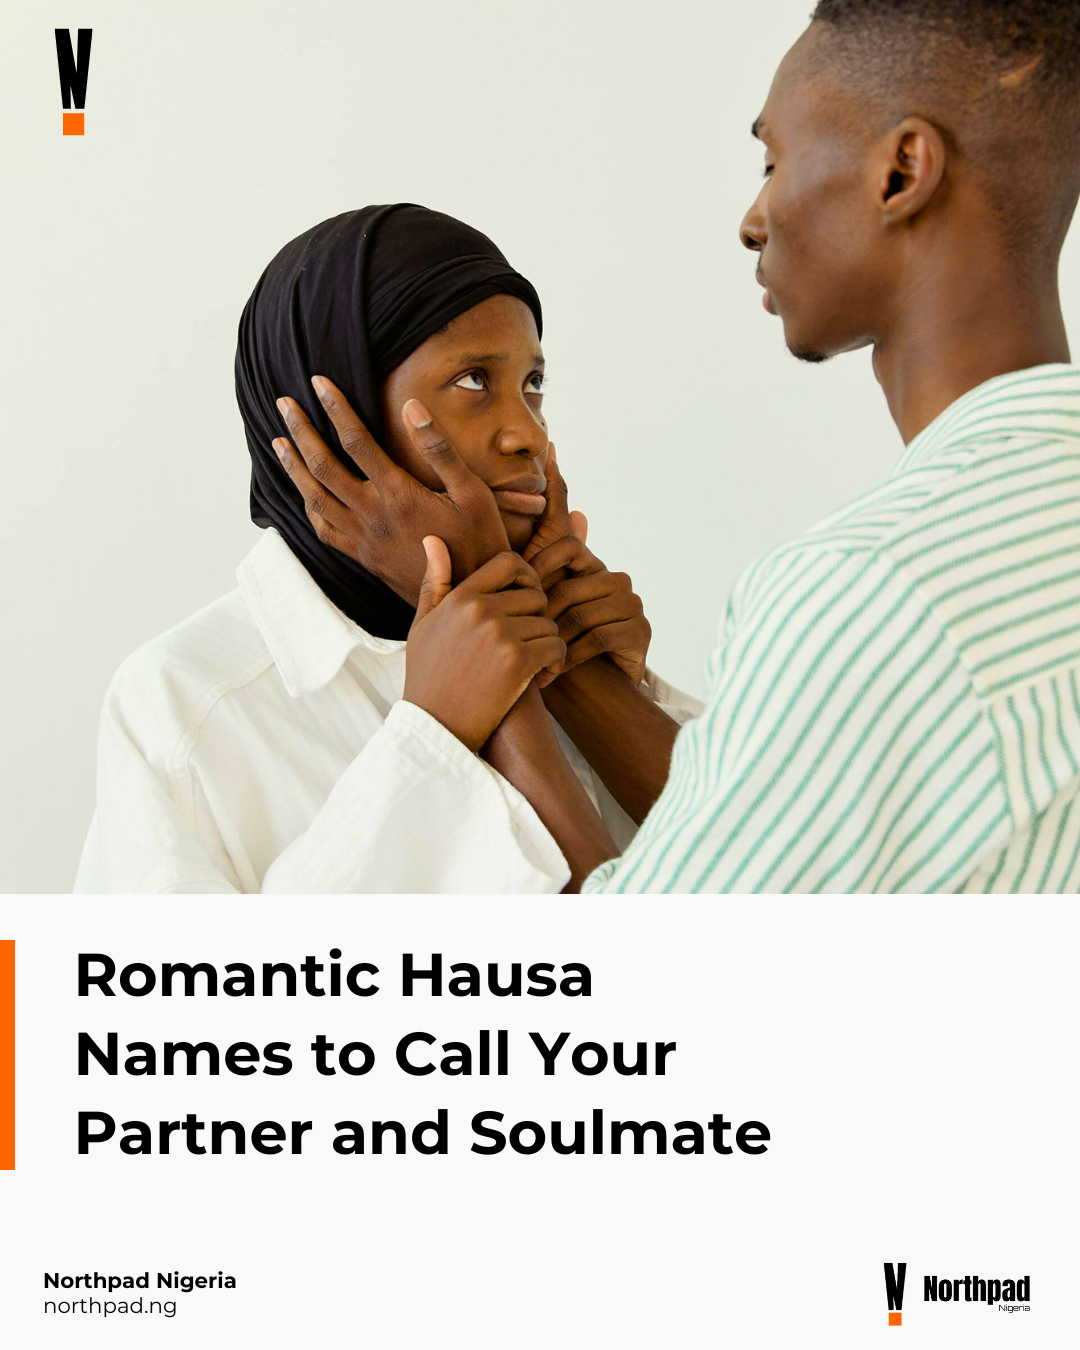 Romantic Hausa Names to Call Your Partner and Soulmate